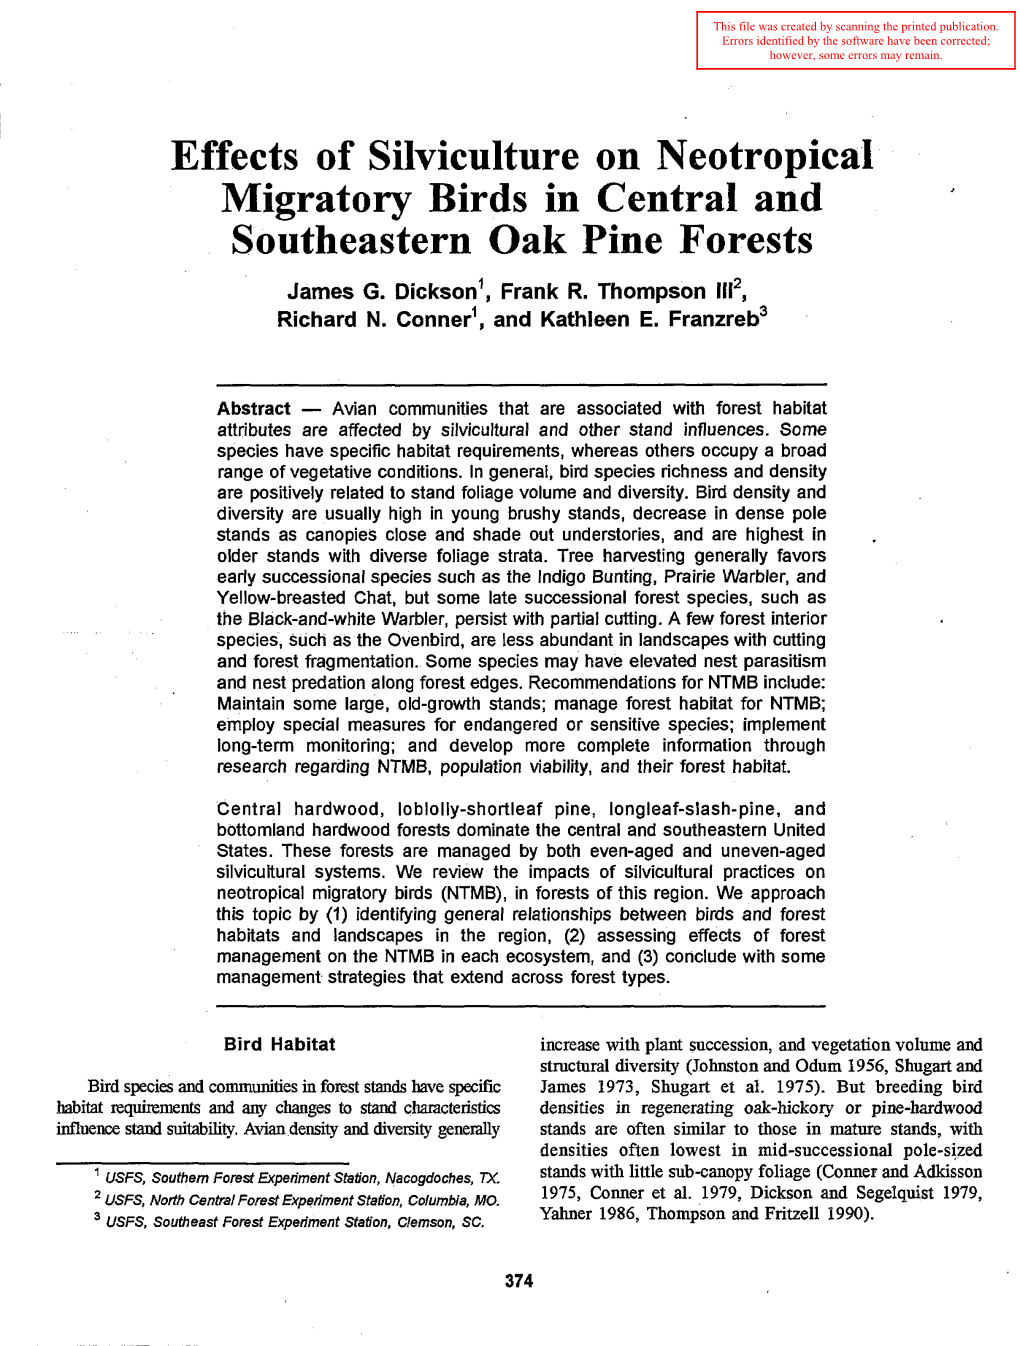 Effects of Silviculture on Neotropical Migratory Birds in Central and Southeastern Oak Pine Forests James G